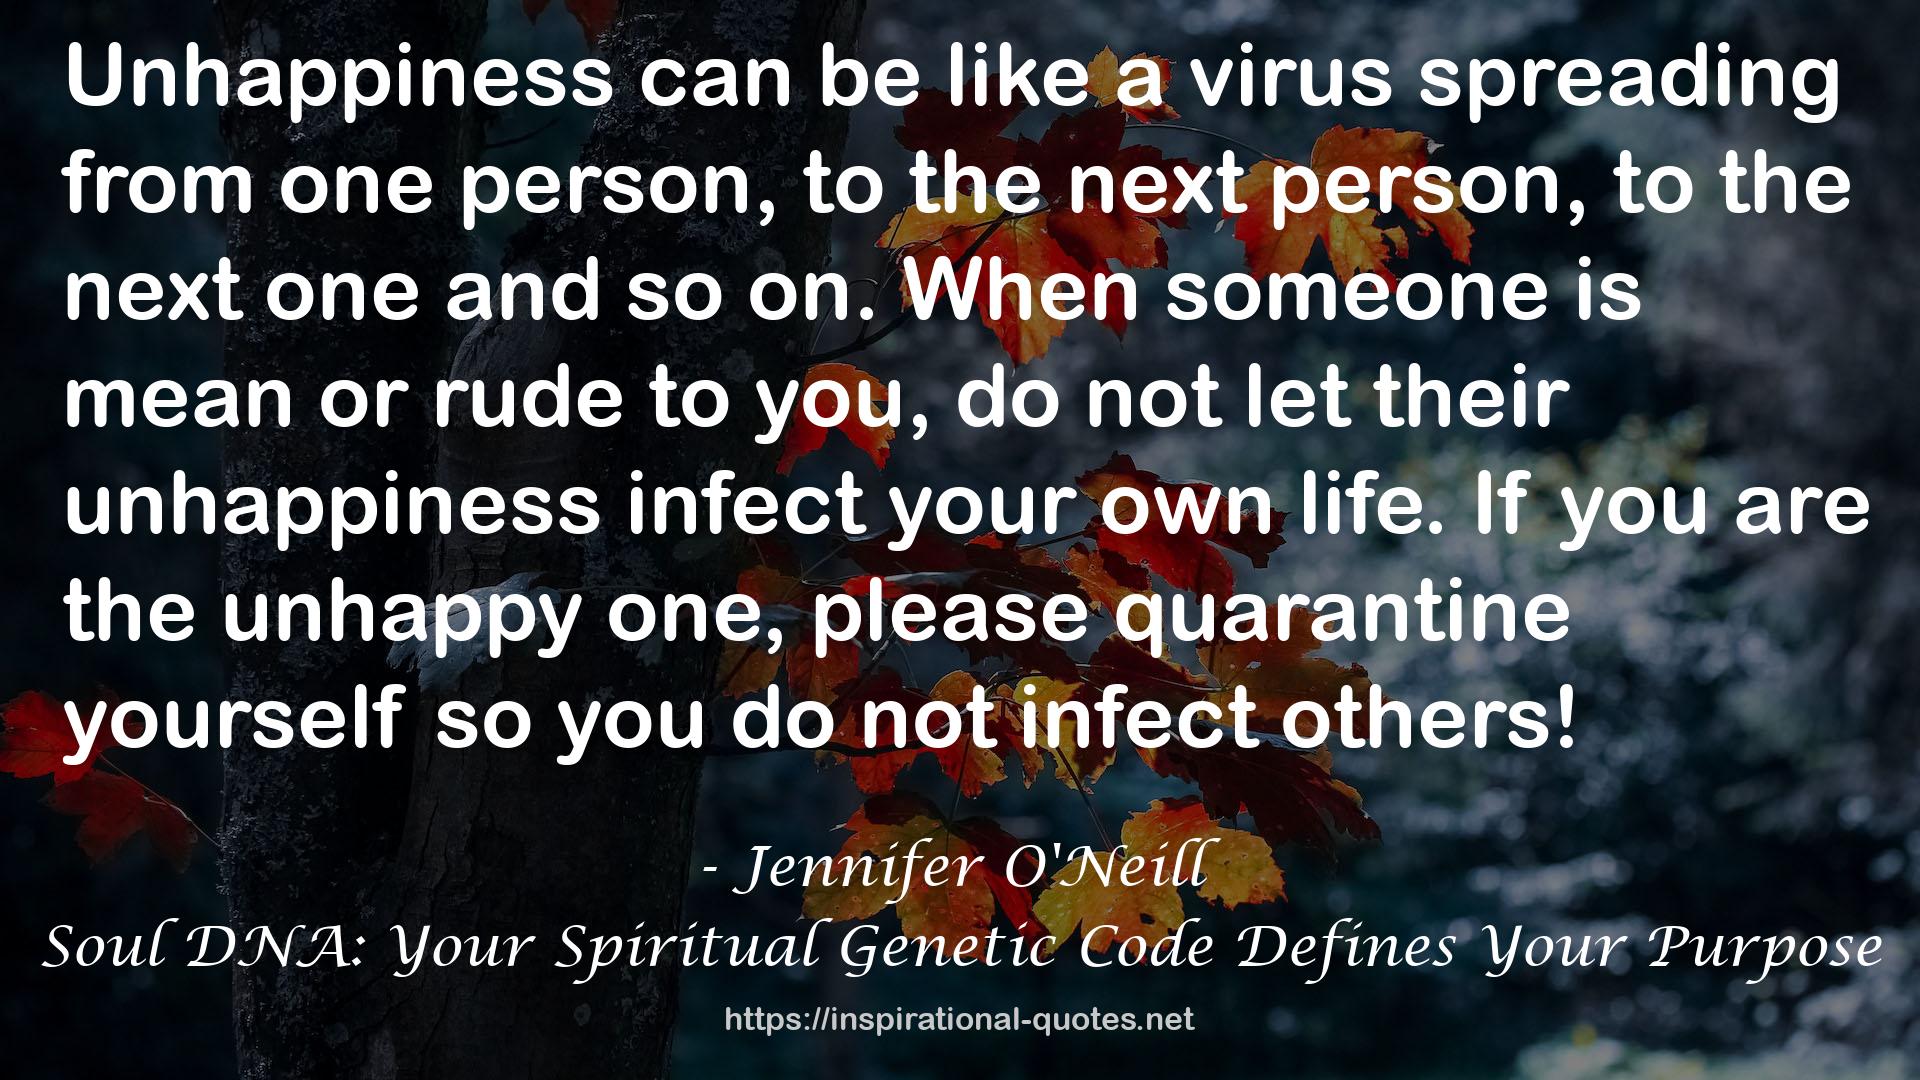 Soul DNA: Your Spiritual Genetic Code Defines Your Purpose QUOTES